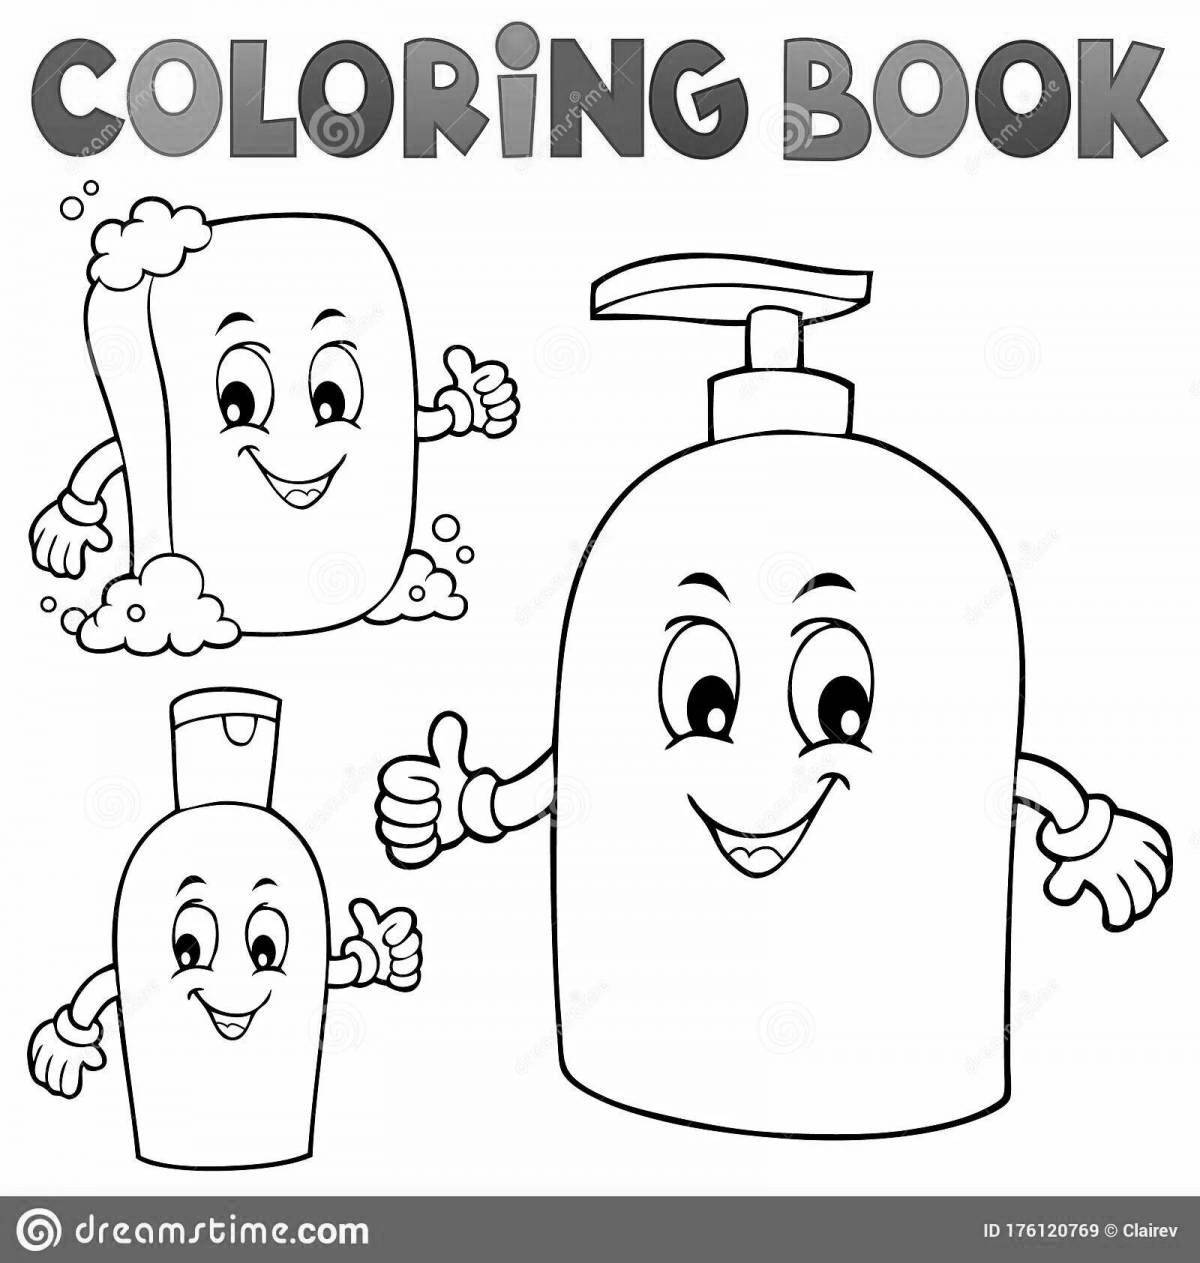 Great shampoo coloring page for kids